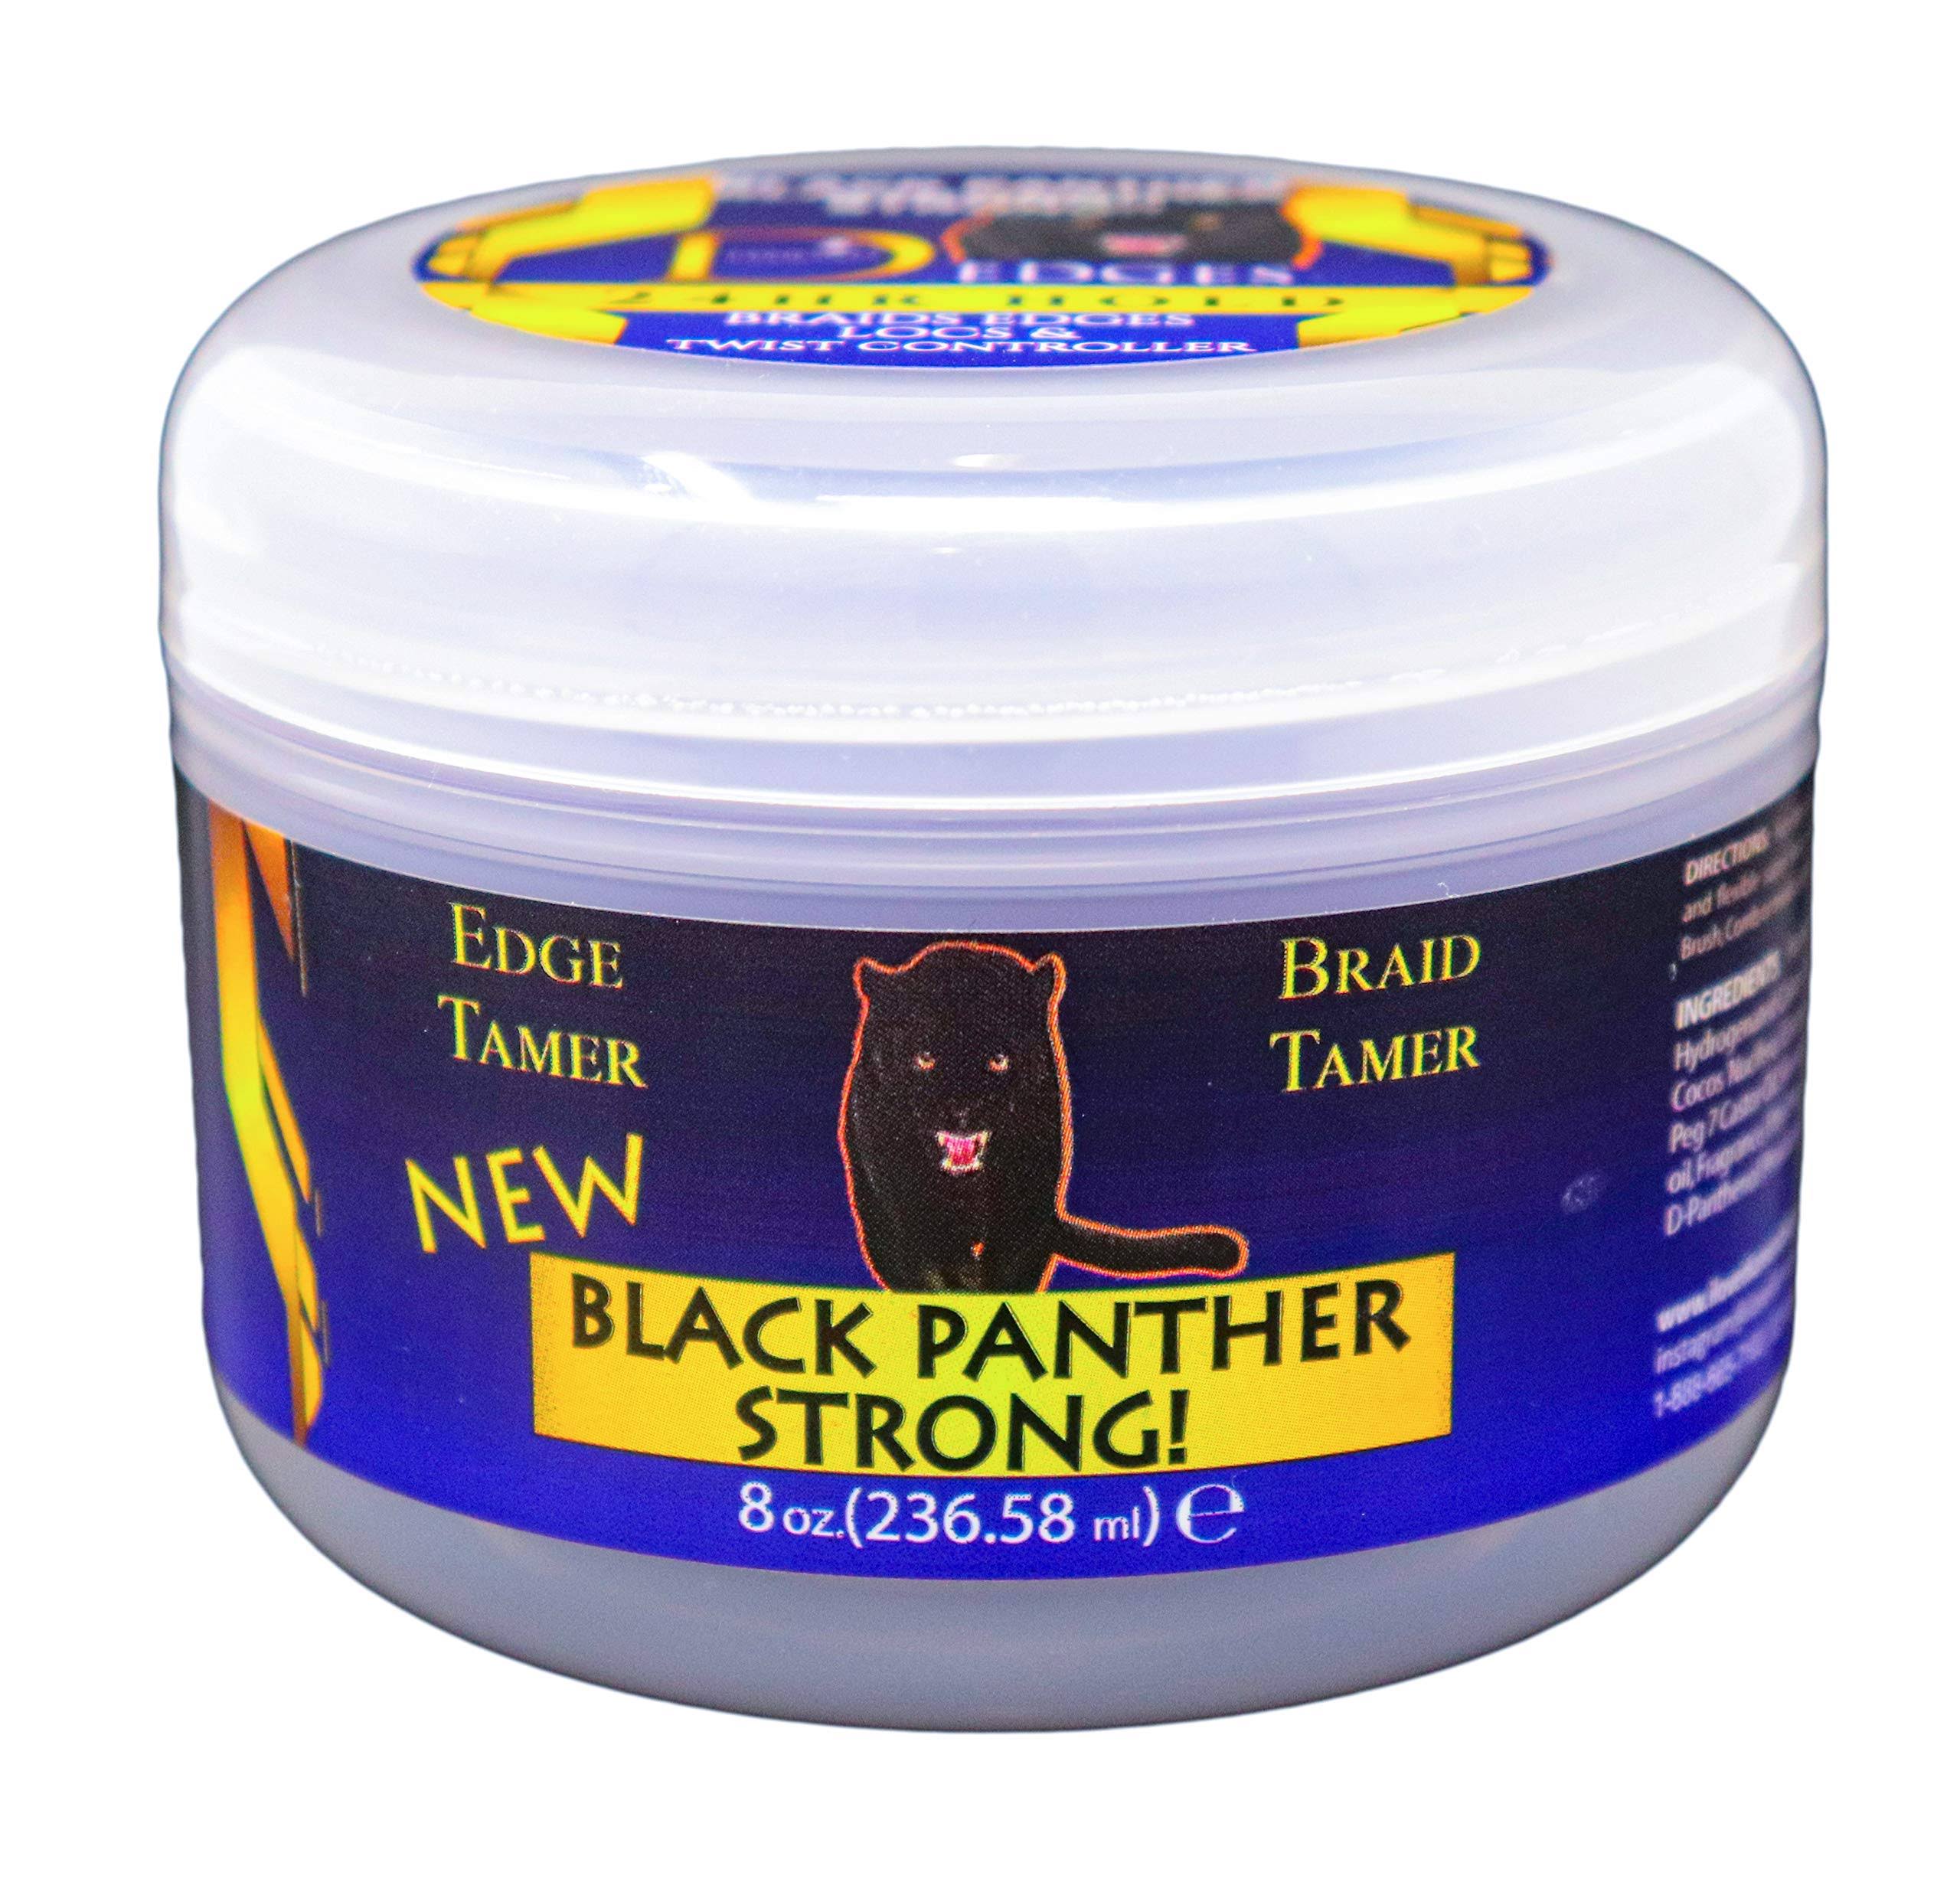 Black PANTHER STRONG - Edge and Braid Control POMADE 8 oz. Styling Gel